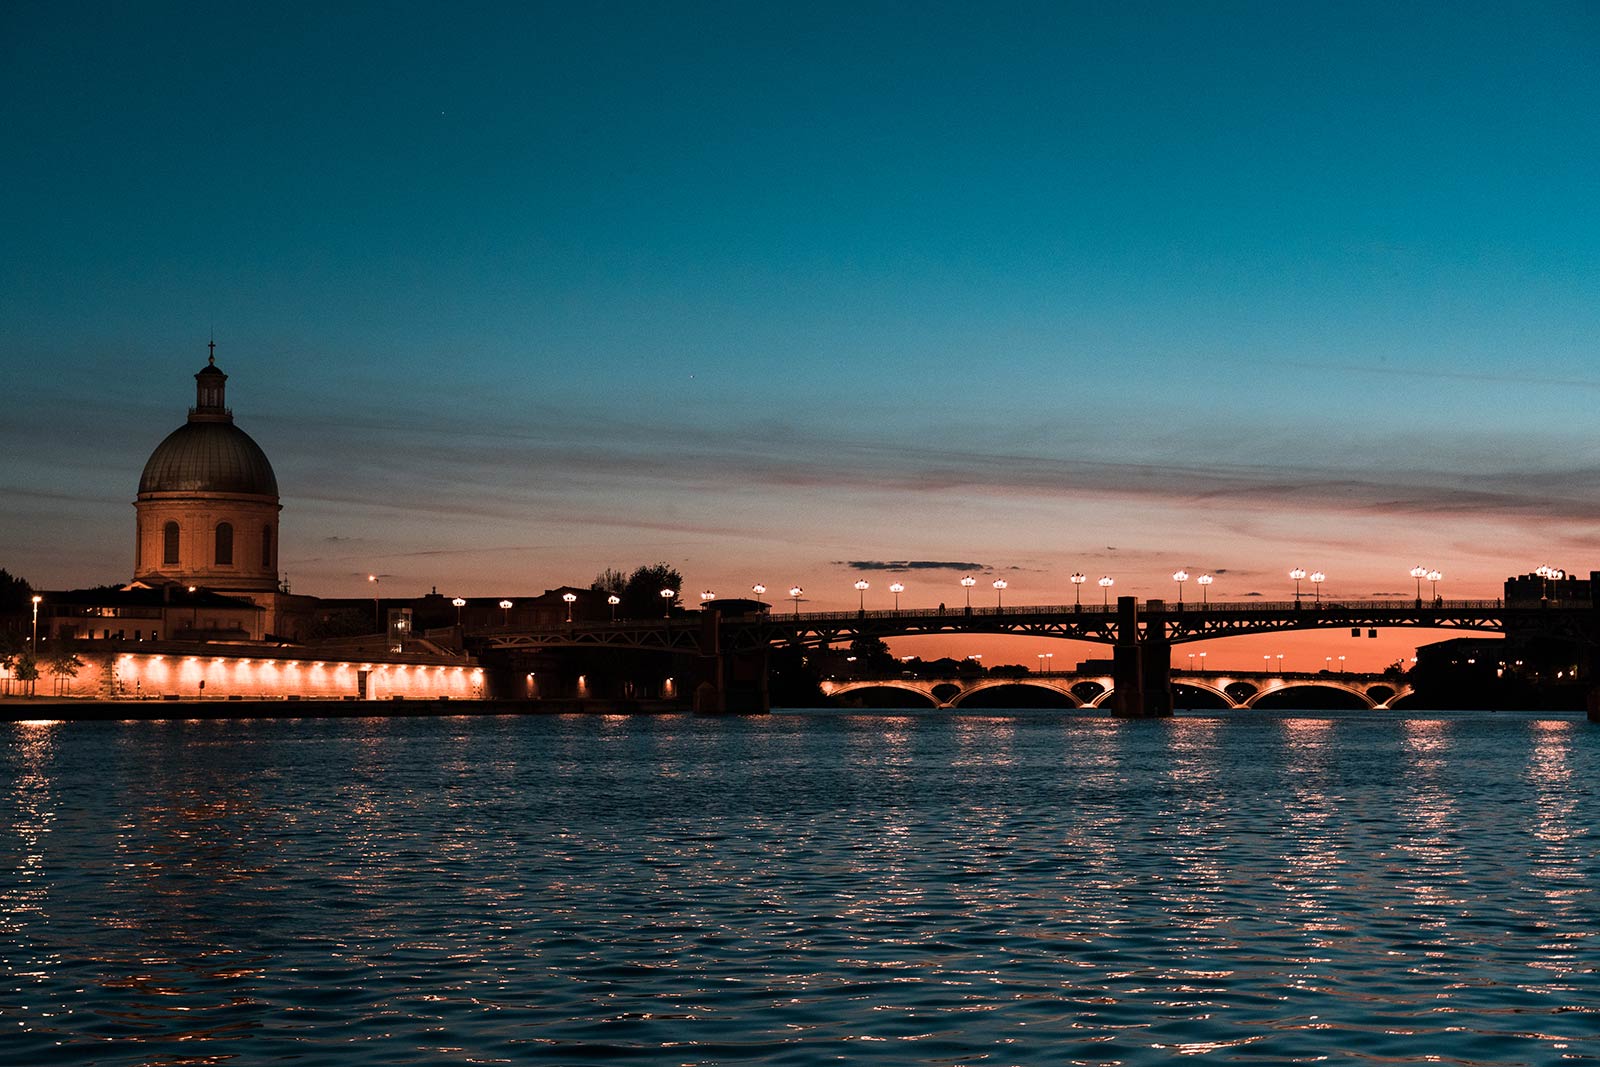 Sunset at Garonne River in Toulouse, France. The greatest buskers ever